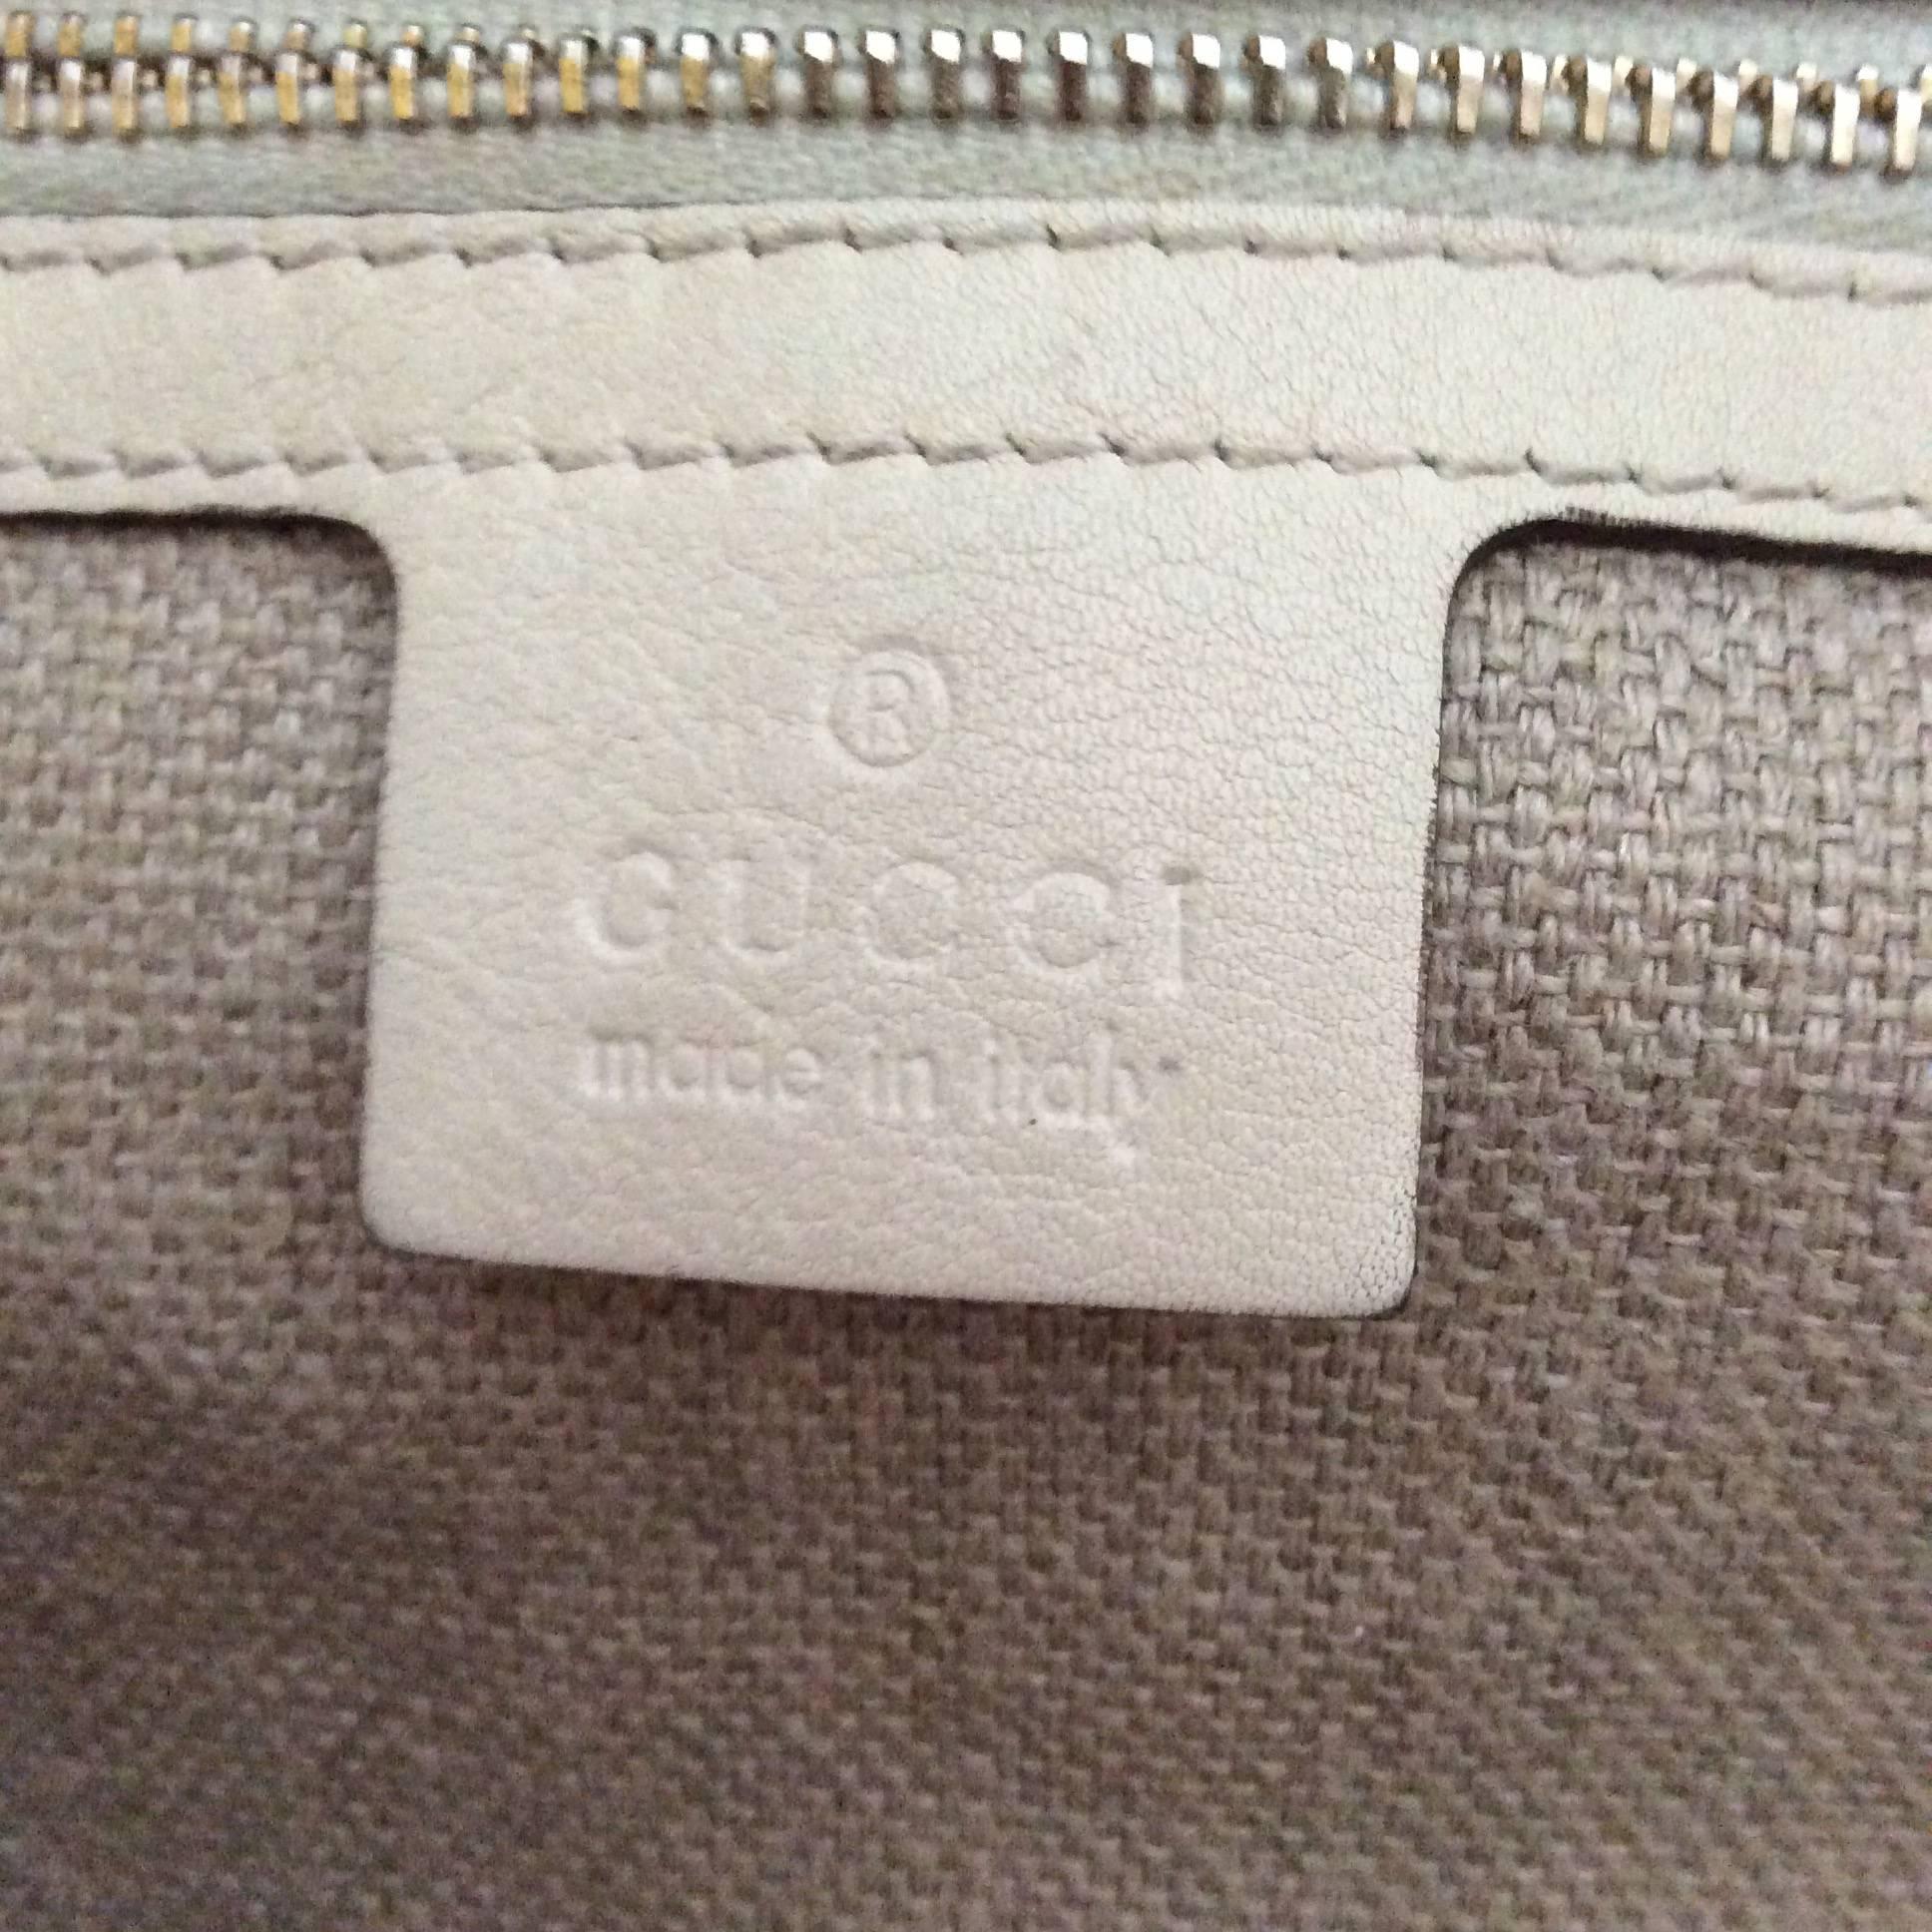 Gucci Purse - Bamboo Handle with Lizard - Tom Ford - Limited Edition For Sale 2